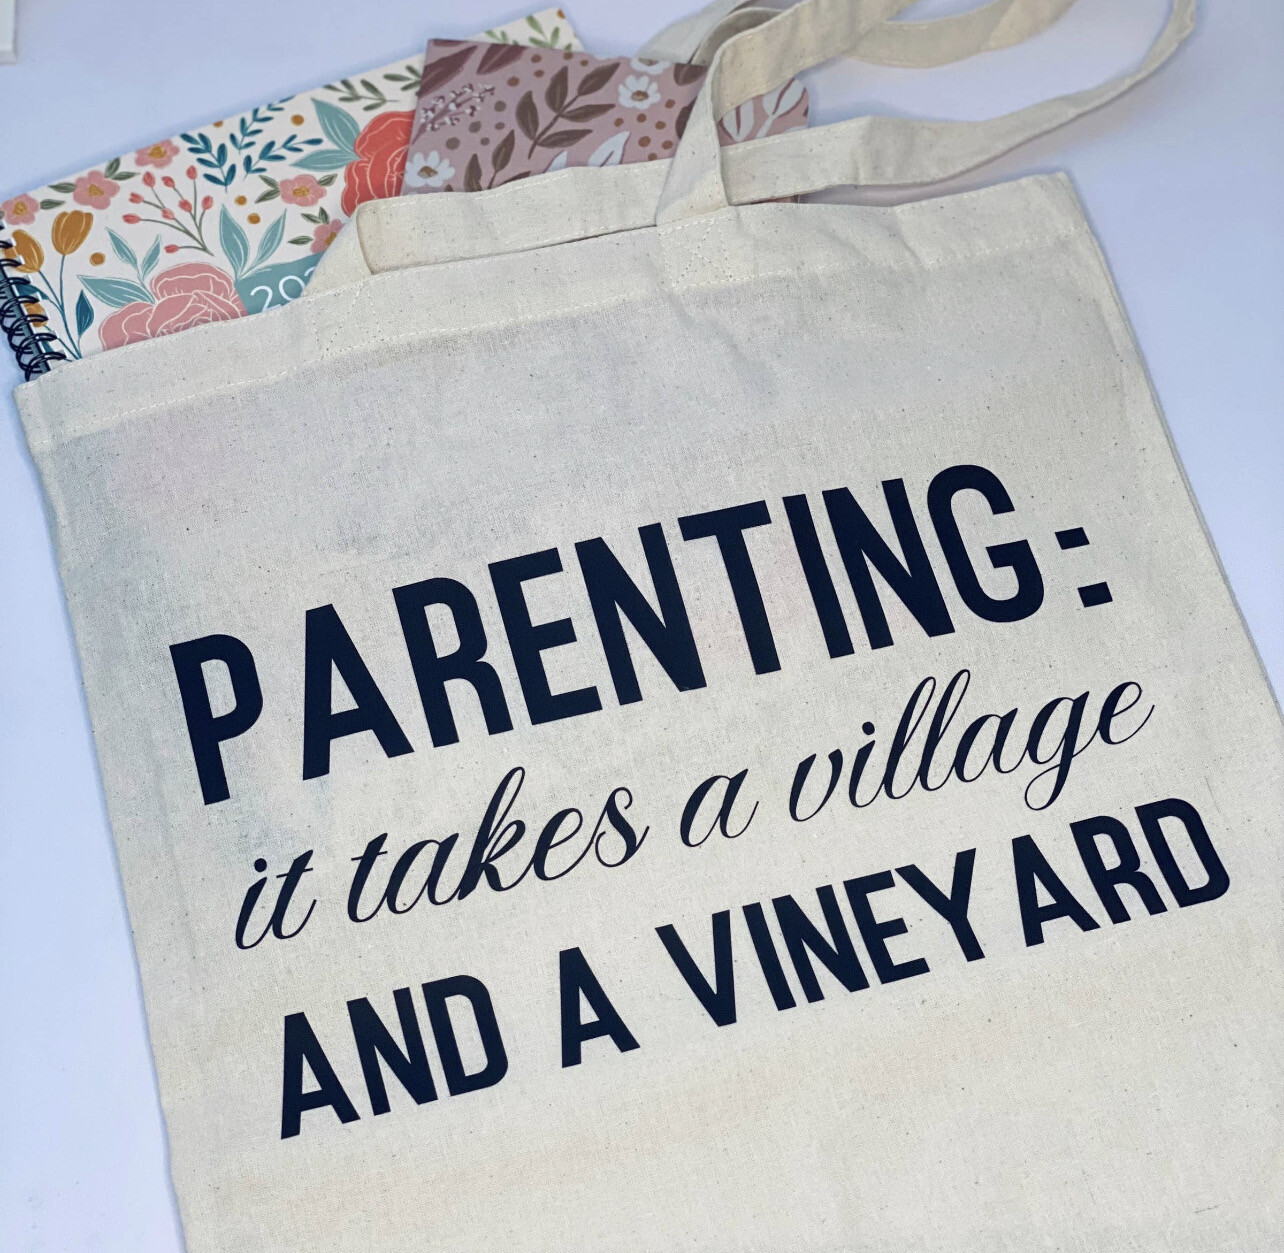 Parenting: It Takes A Village And A Vineyard Tote Bag